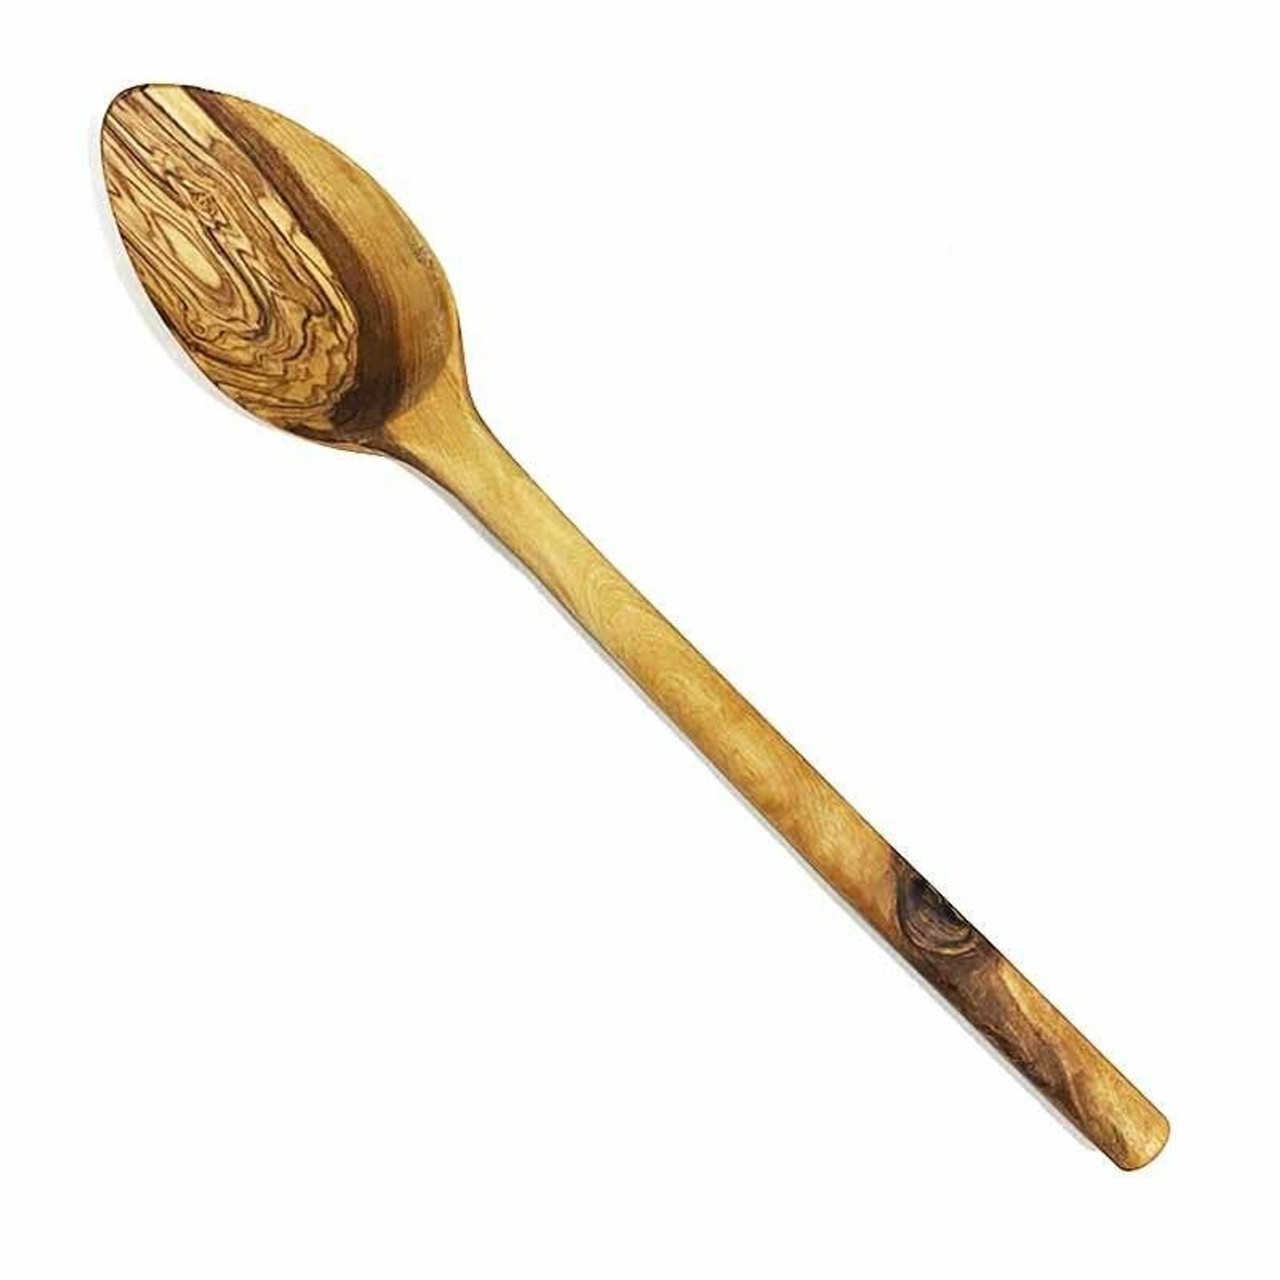 https://cdn11.bigcommerce.com/s-pa7lxgfduc/images/stencil/1280x1280/products/368/1210/marnamaria-spices-and-herbs-olive-wood-french-spoon__72182.1638637221.jpg?c=1